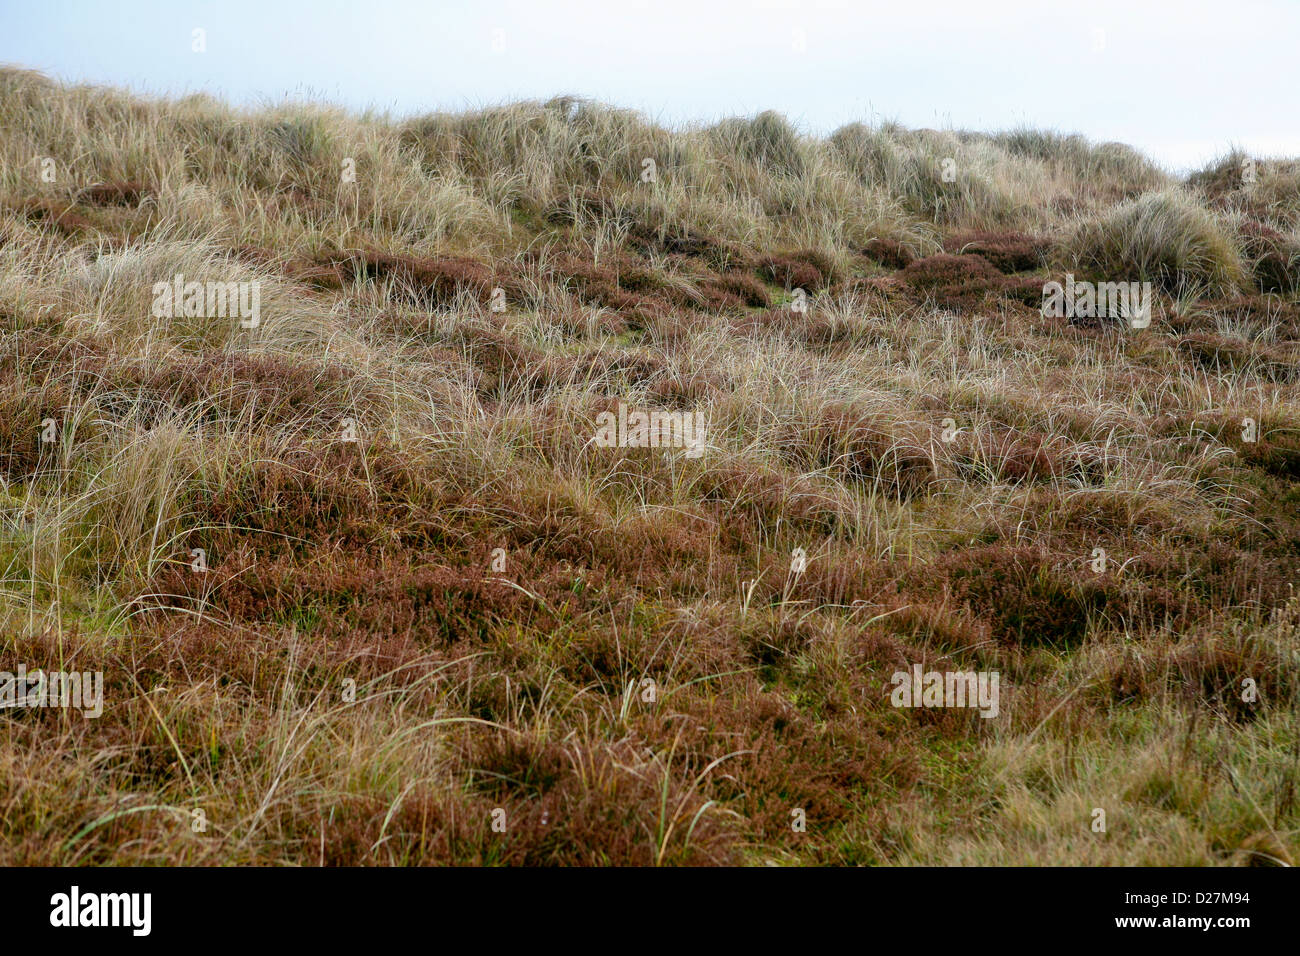 Grasses, sedges, and heather cover a sand dune at Sea Palling, Norfolk, UK Stock Photo